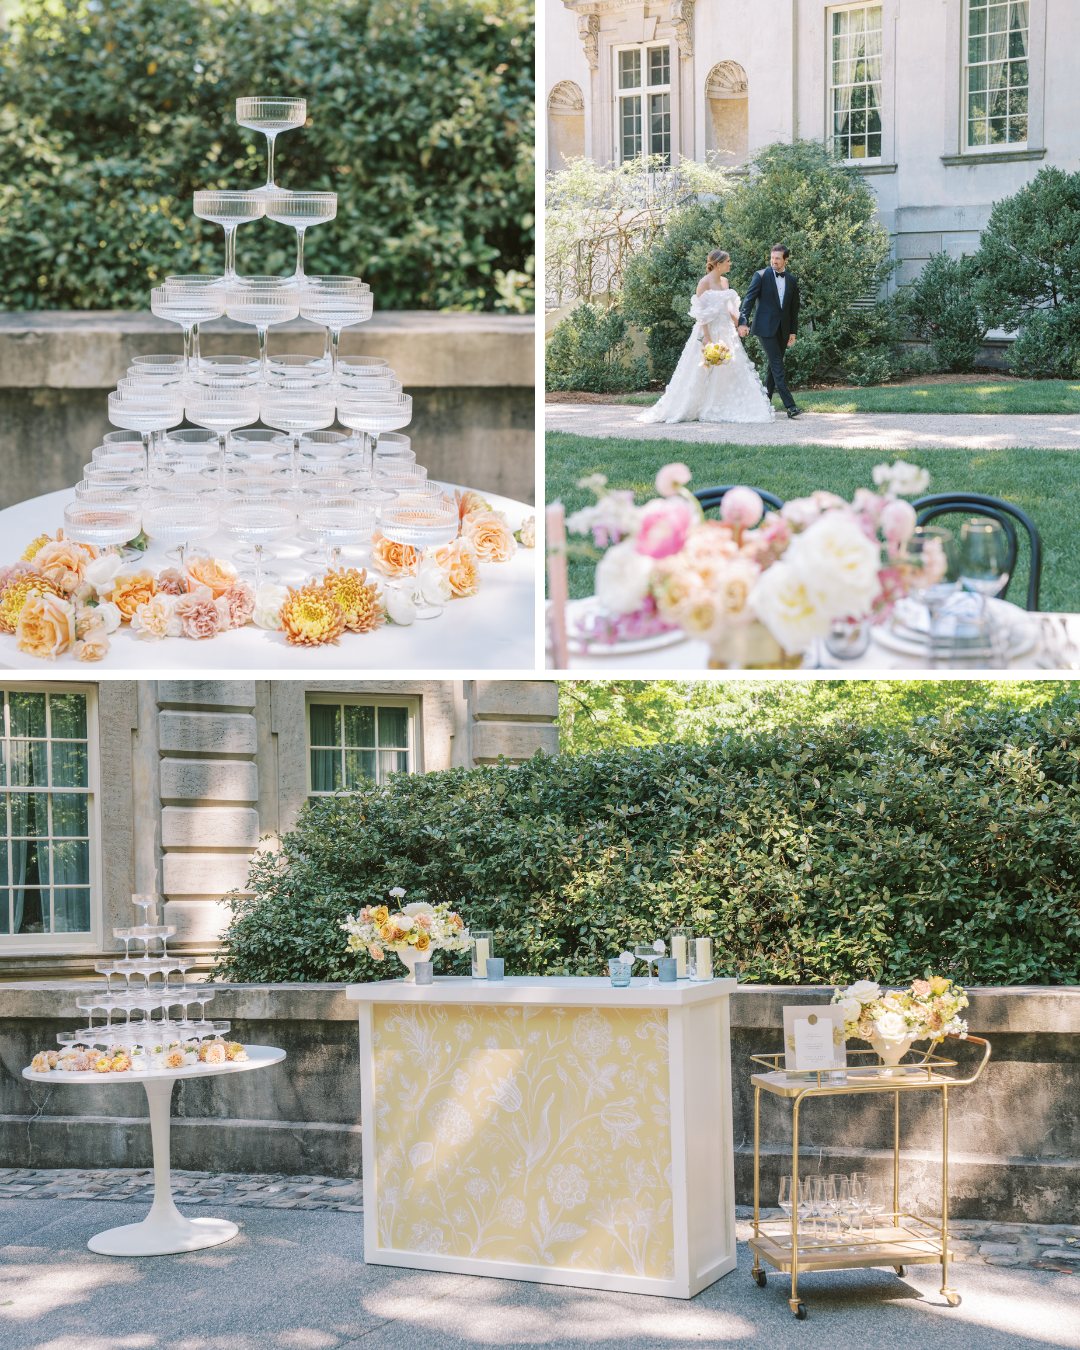 Collage of champagne tower and wedding reception details